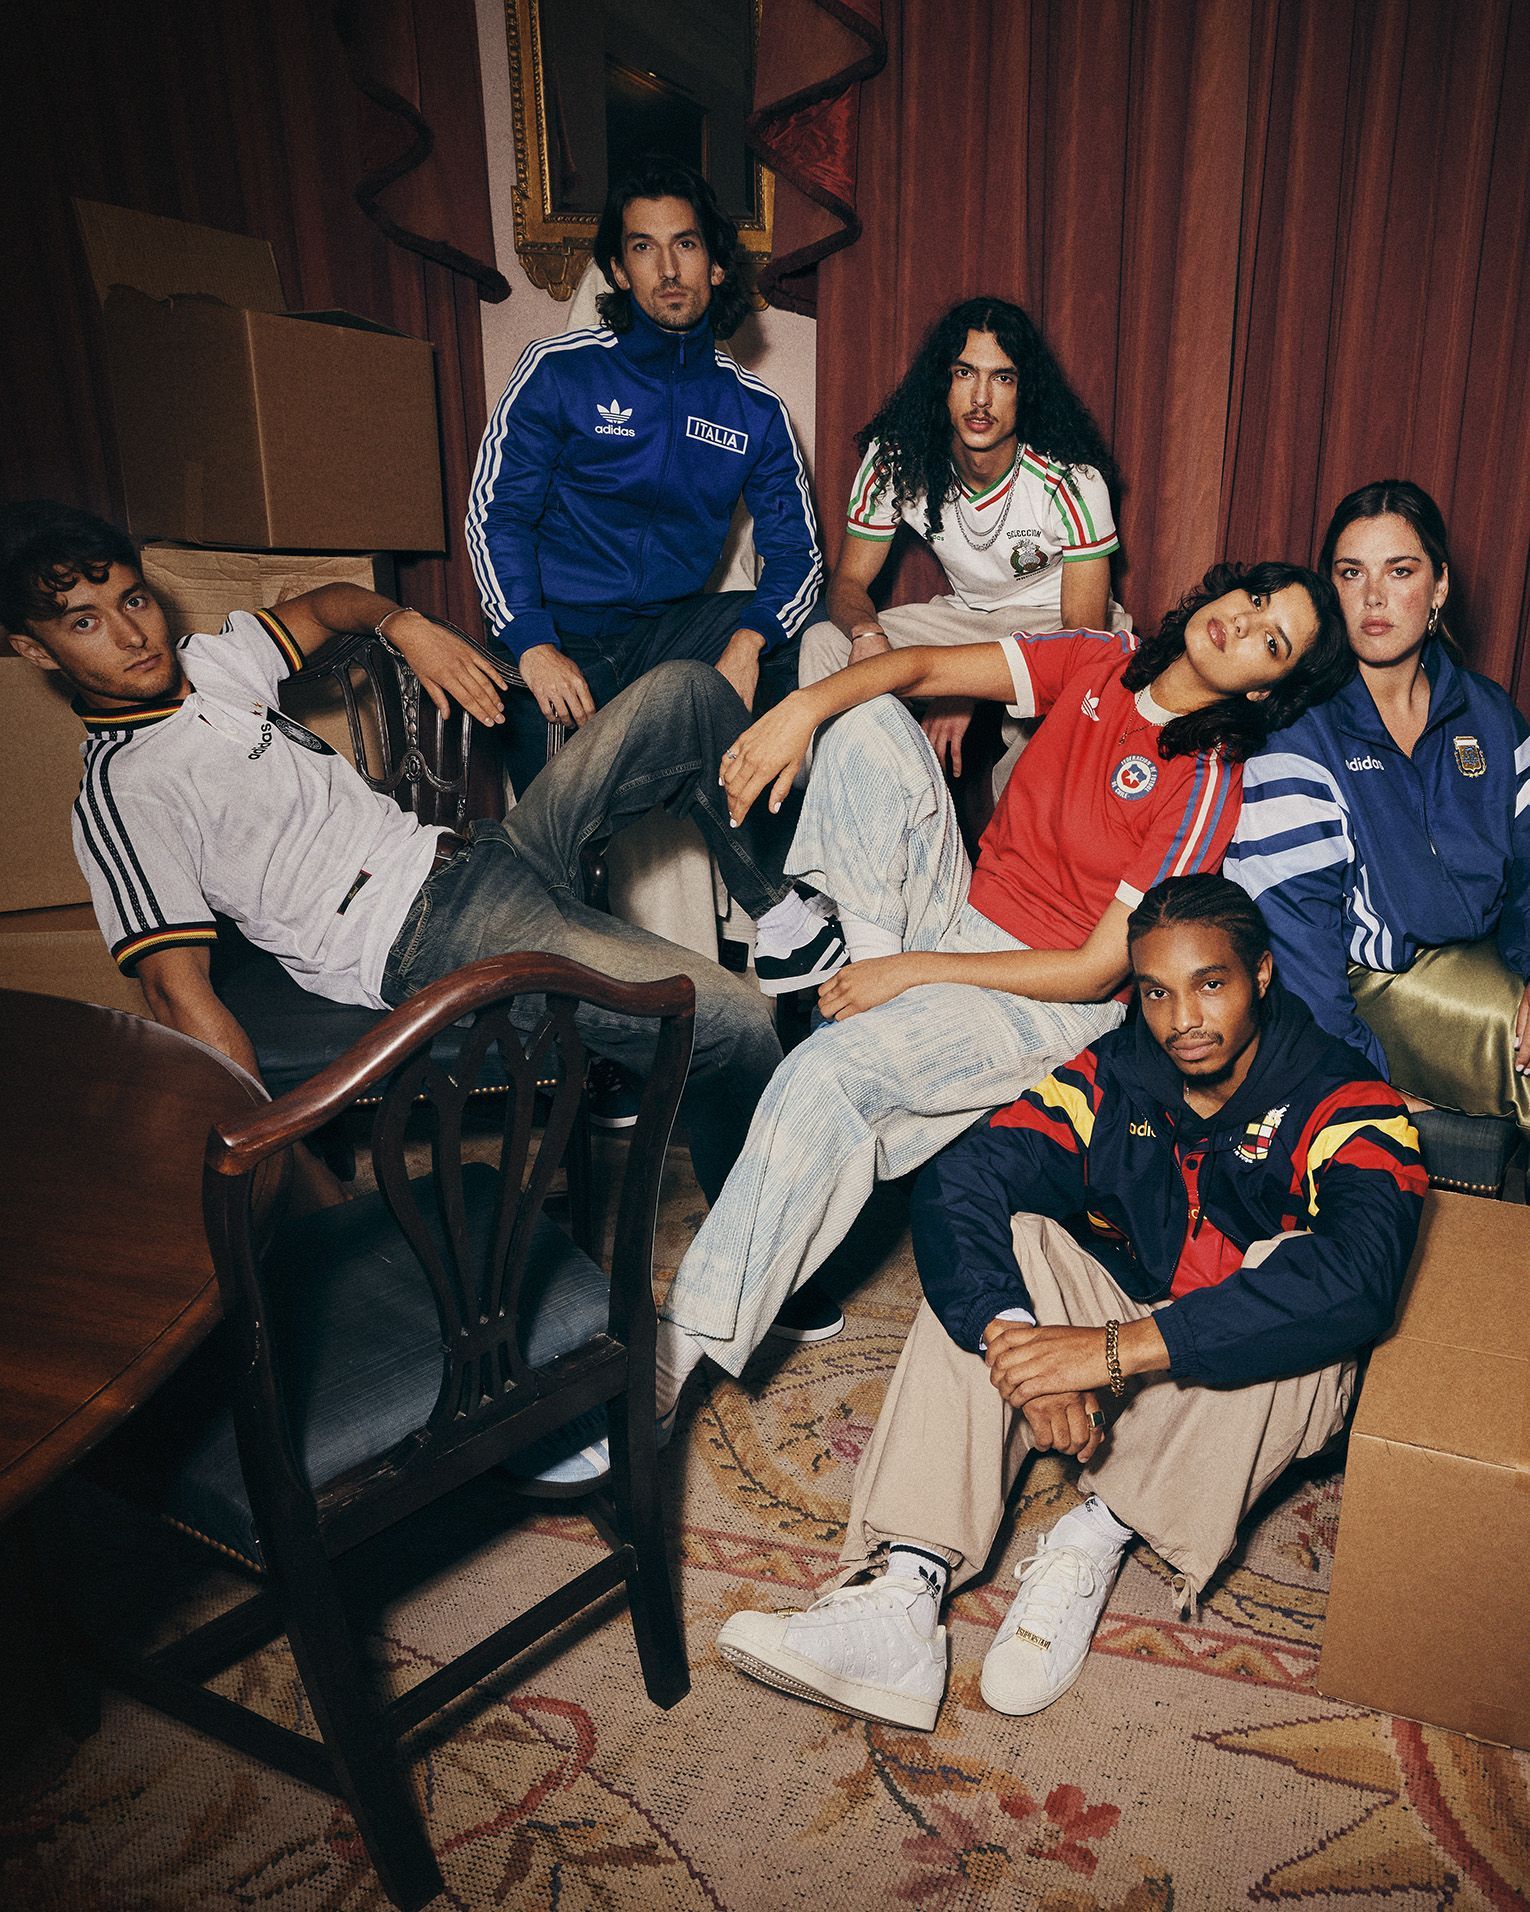 The new adidas Original Football Collection Retro jerseys inspired by historical kits from the 70s, 80s and 90s